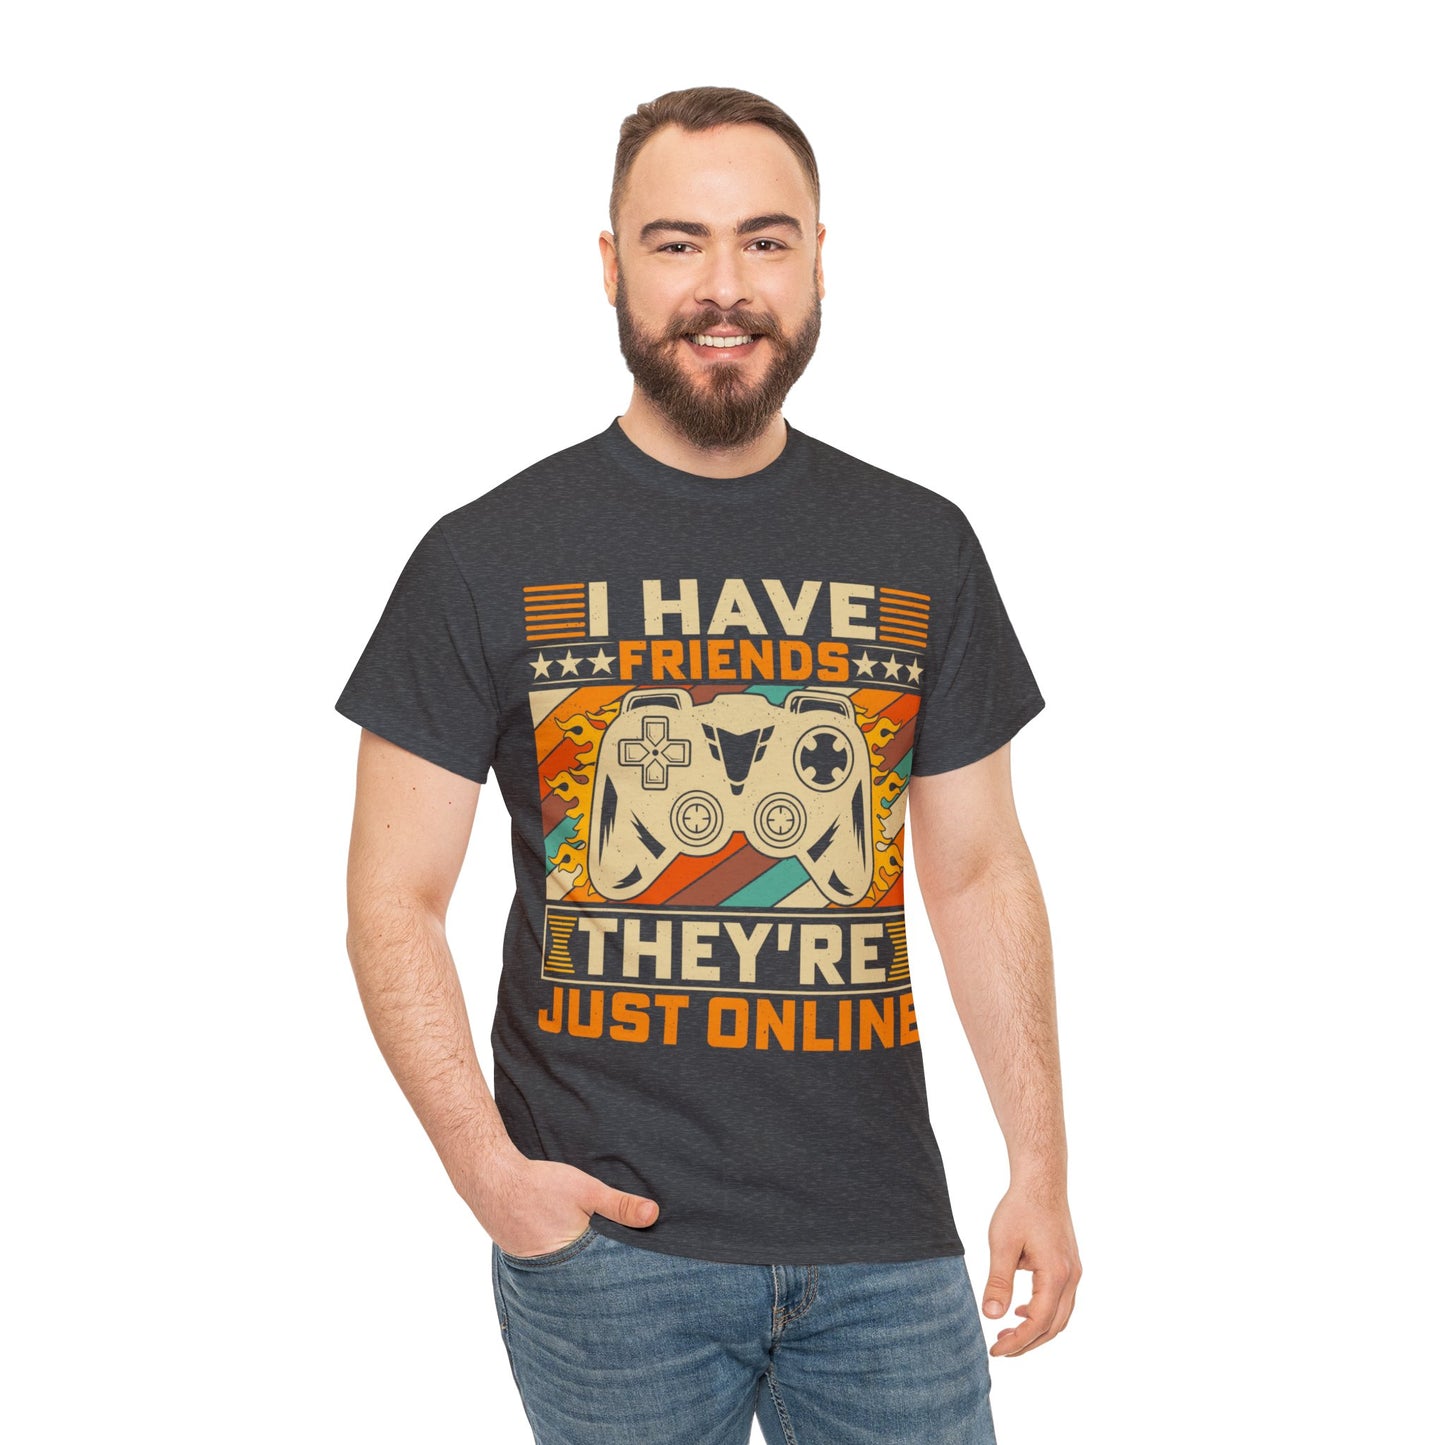 I have friends, they're just online shirt